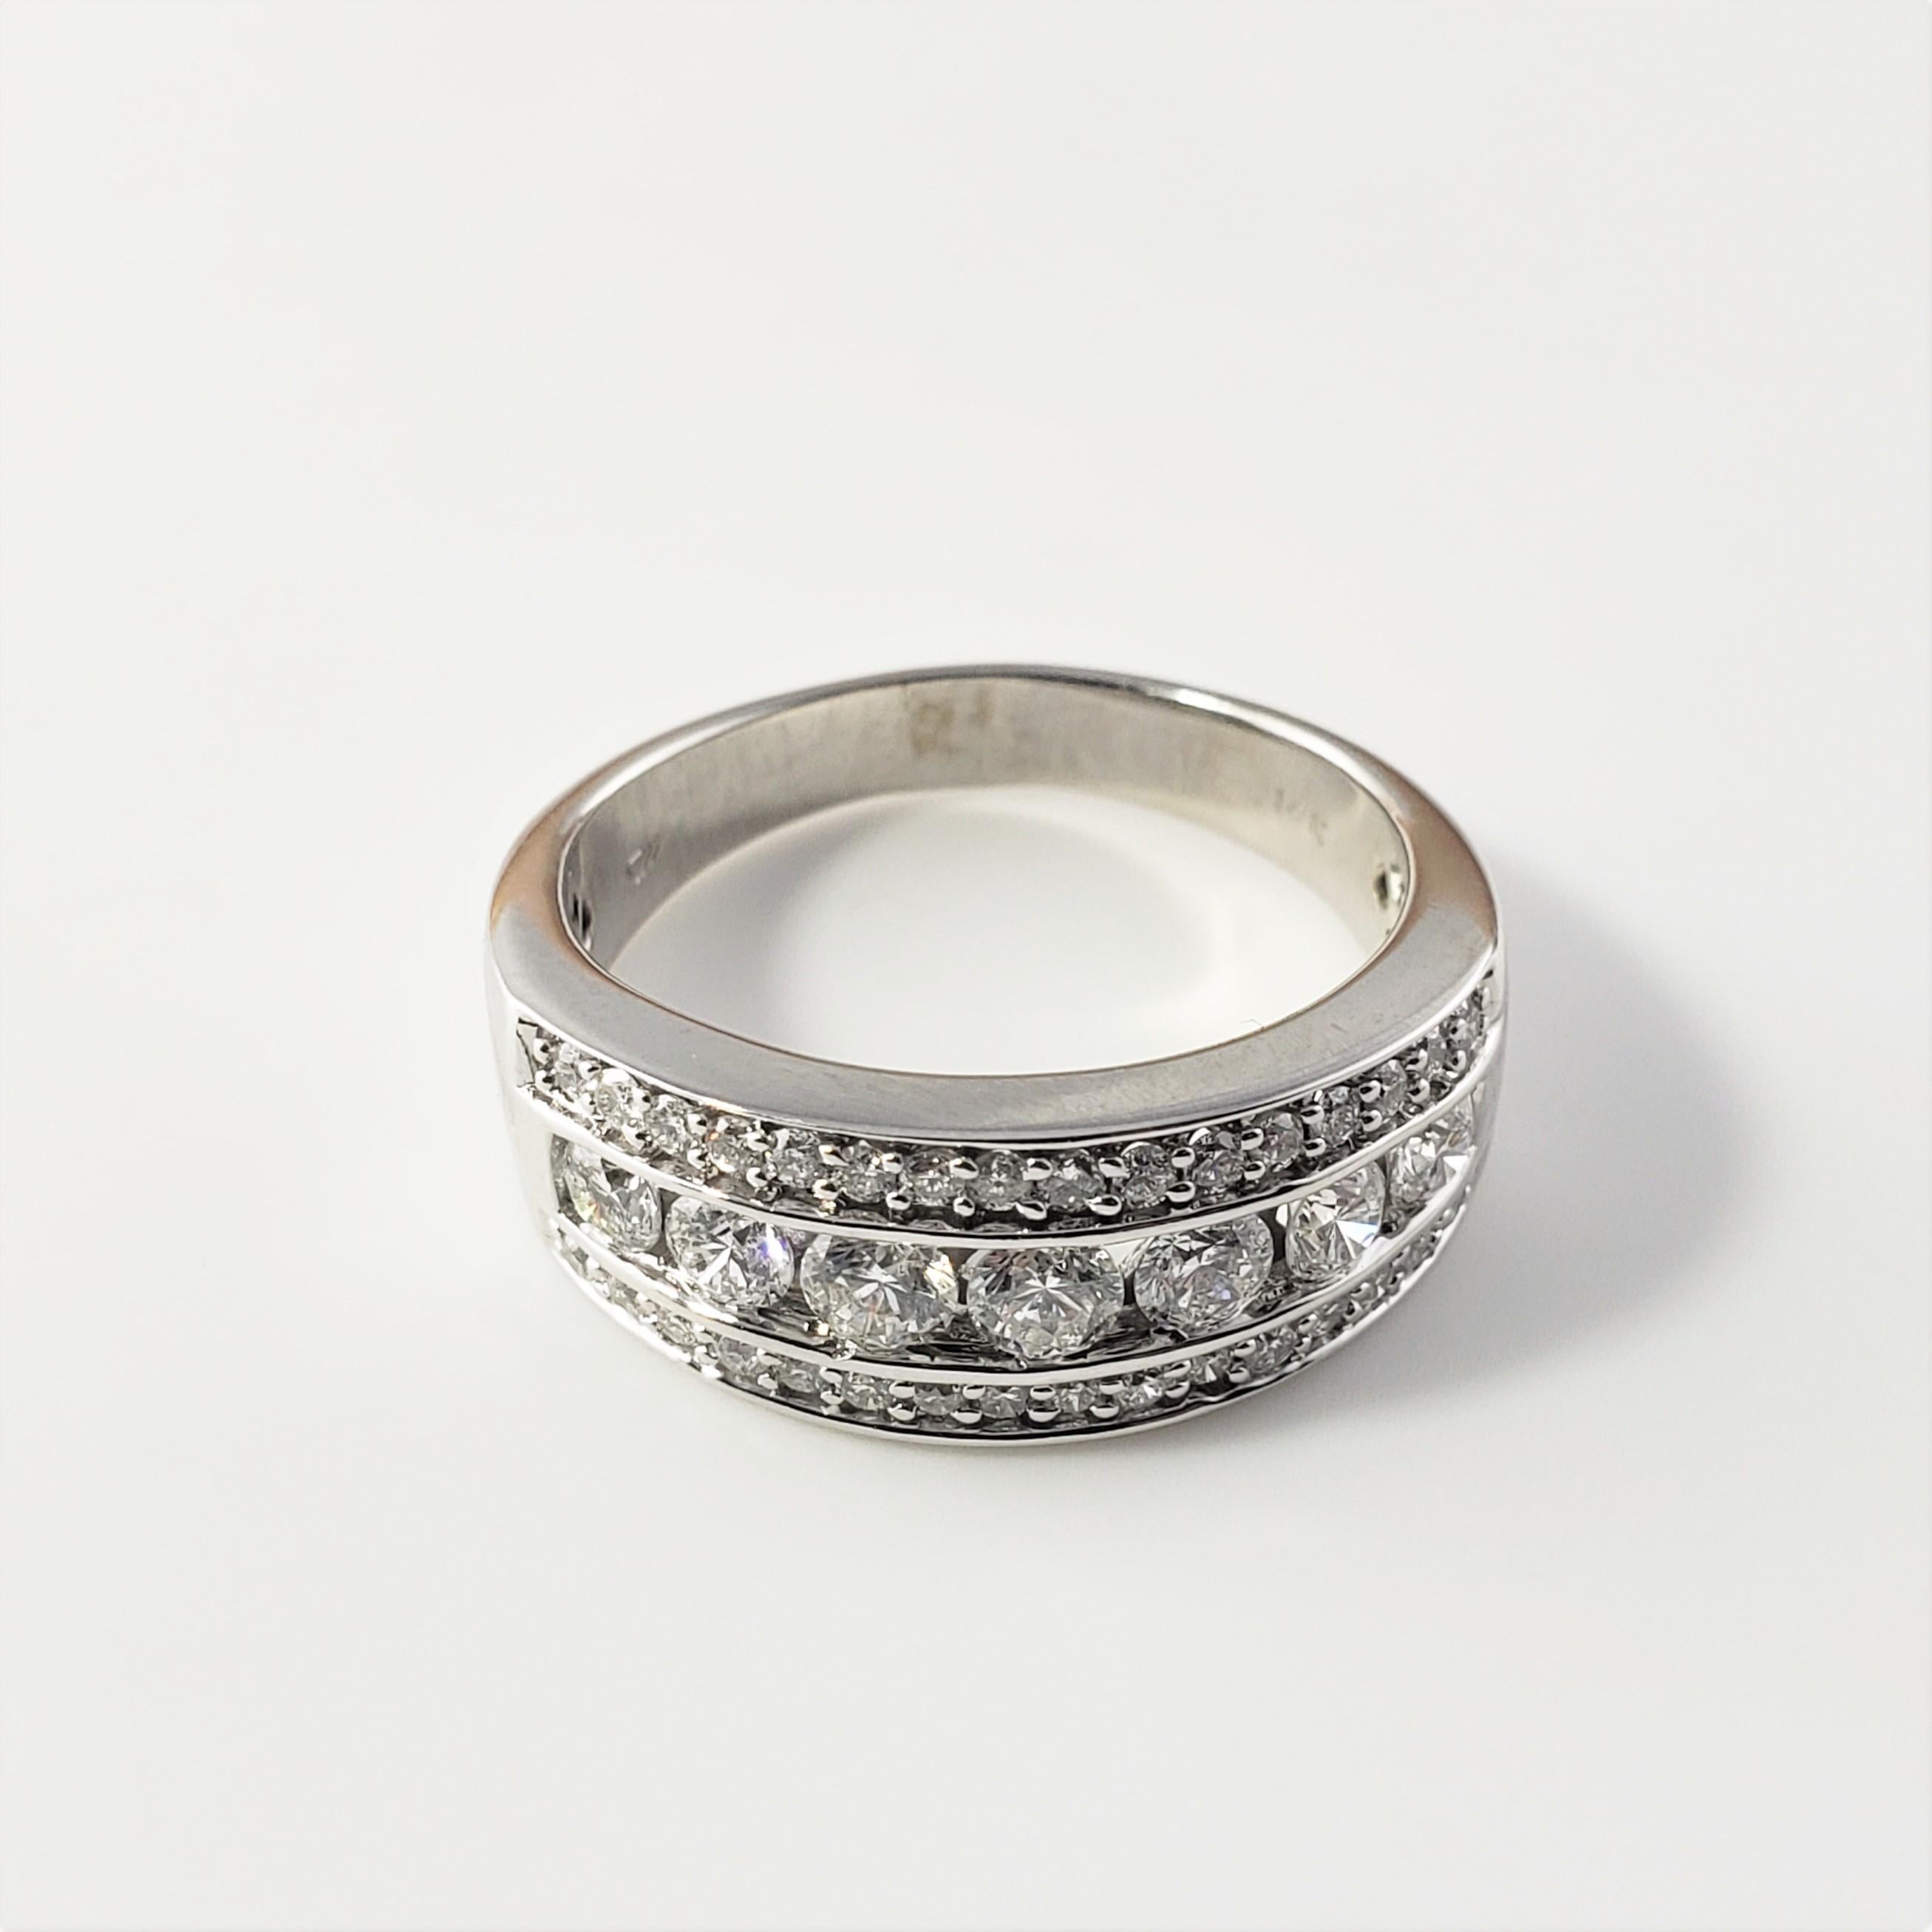 14 Karat White Gold and Diamond Band Ring Size 8 -

This sparkling band features 39 round brilliant cut diamonds set in beautifully detailed 14K white gold.  Width:  8 mm.  Shank:  3 mm.

Approximate total diamond weight:  .90 ct.

Diamond color: 